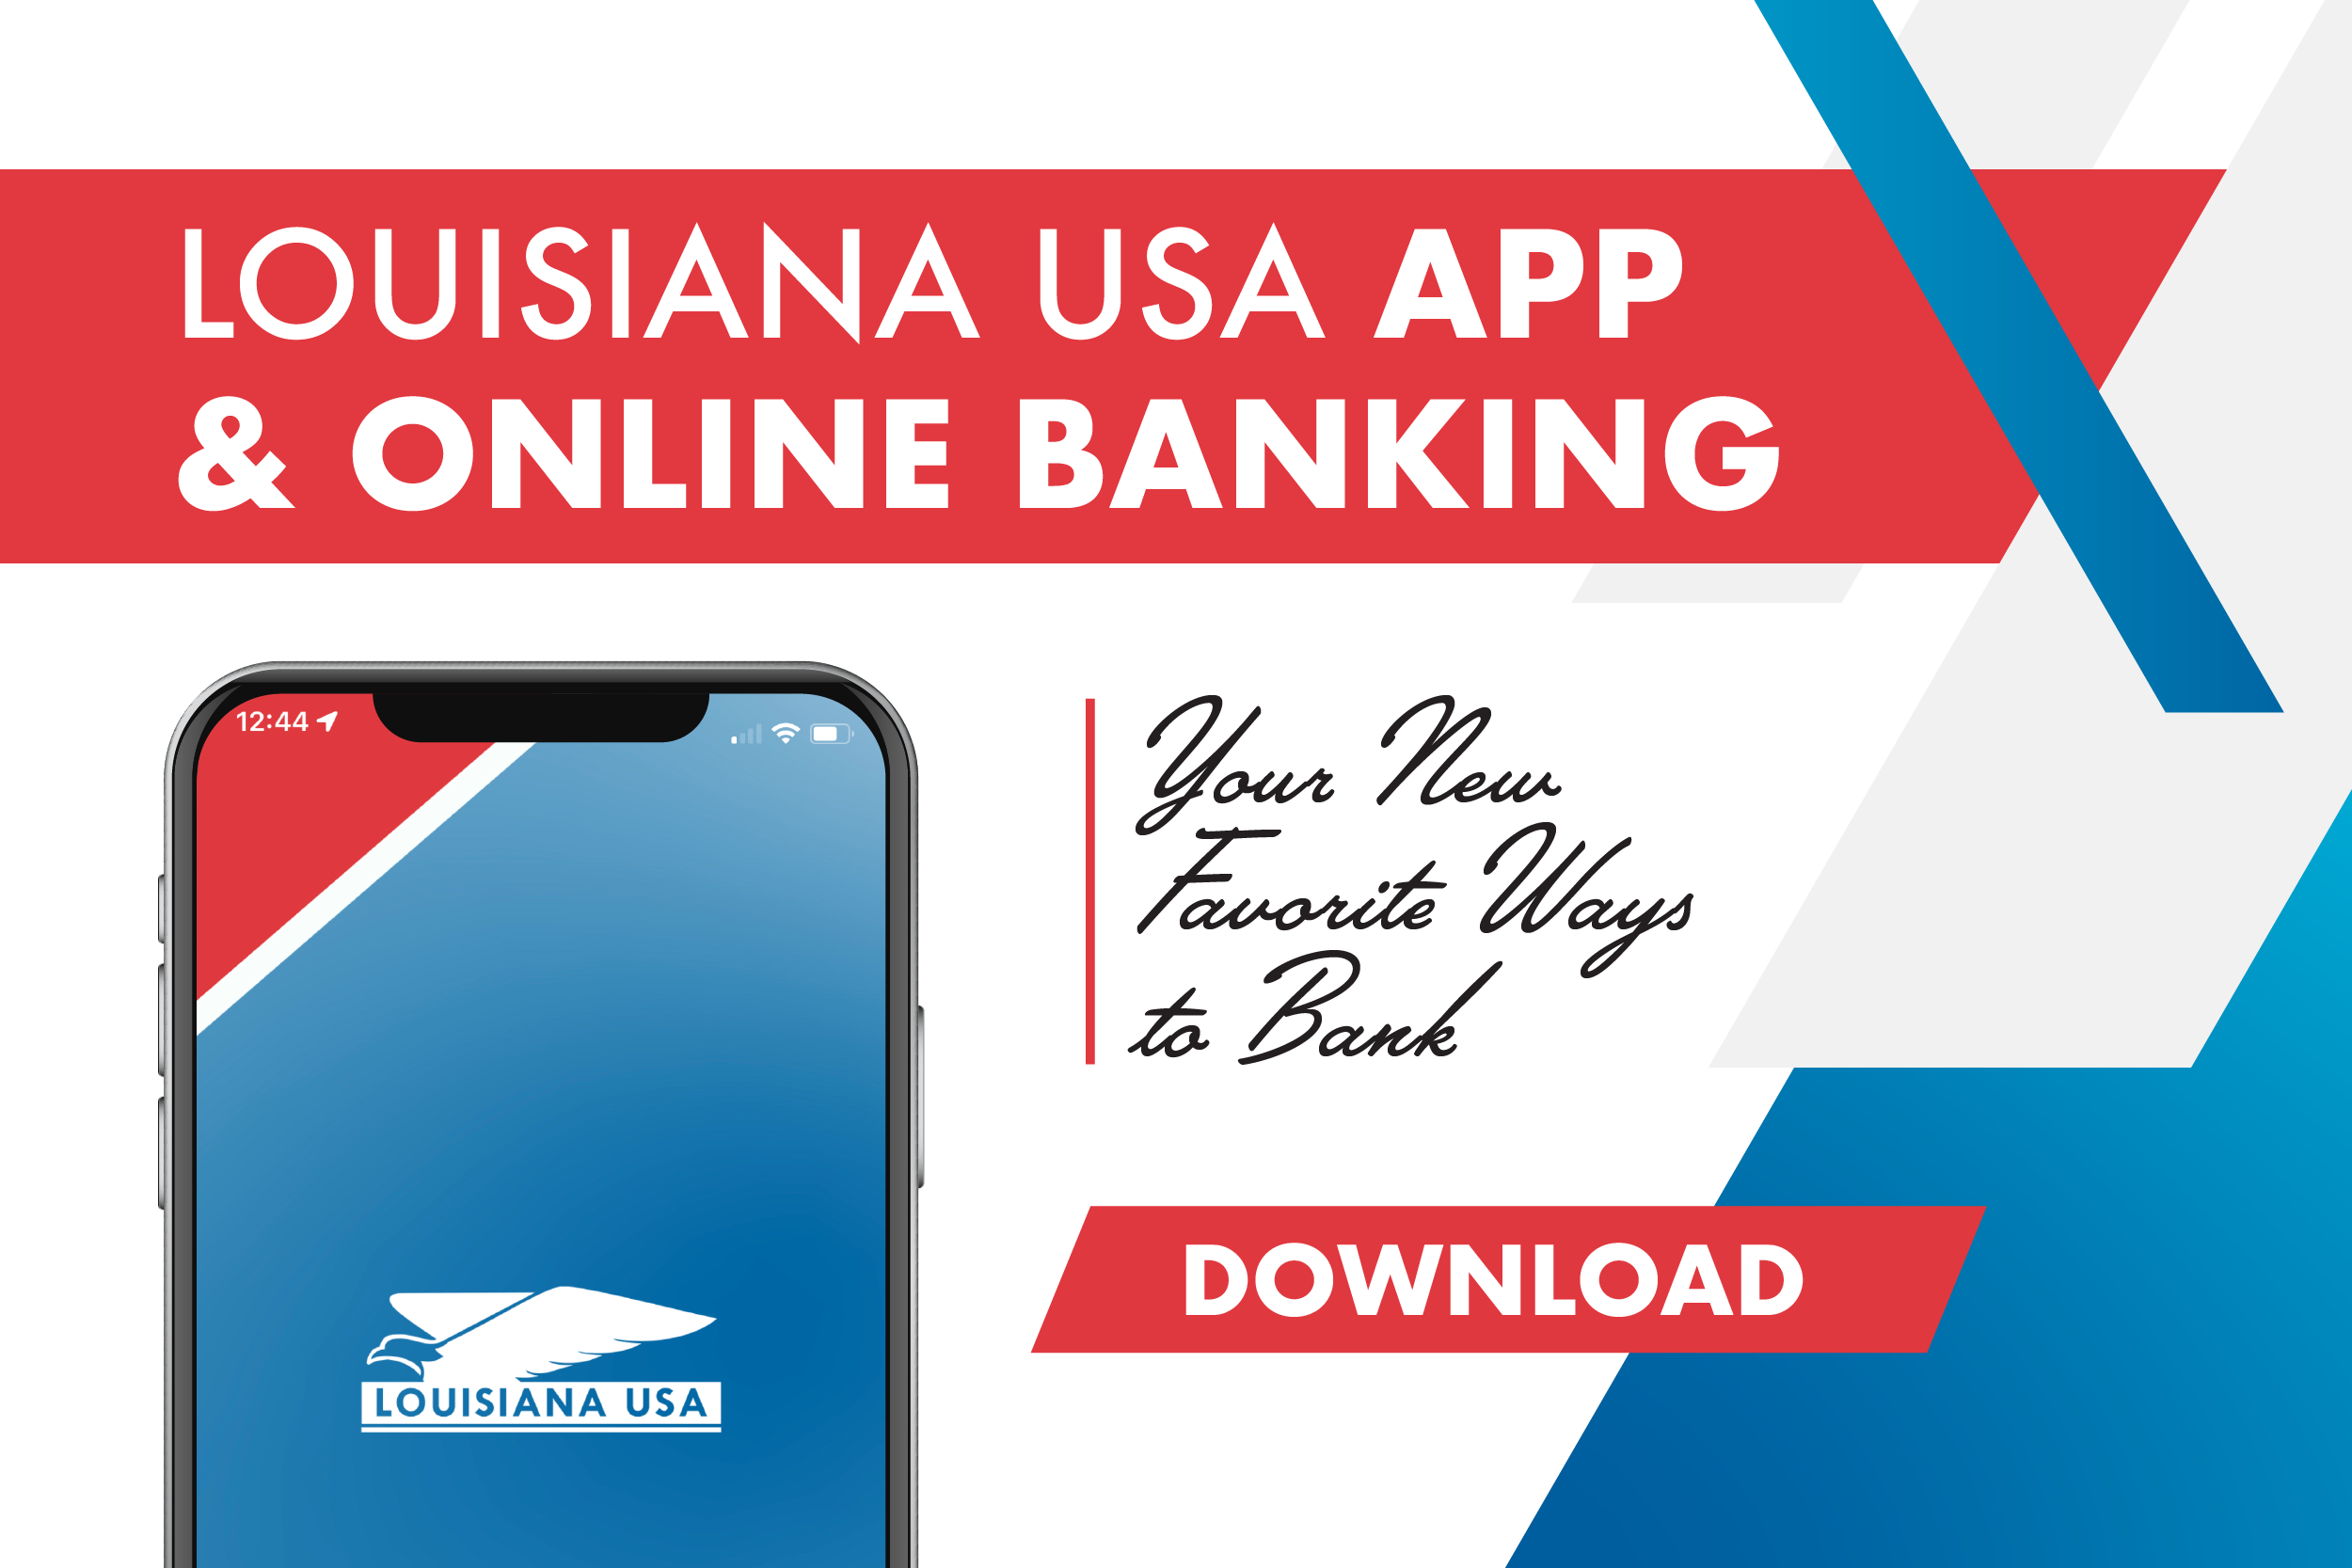 Louisiana USA App & Online: Your New Favorite Ways To Bank